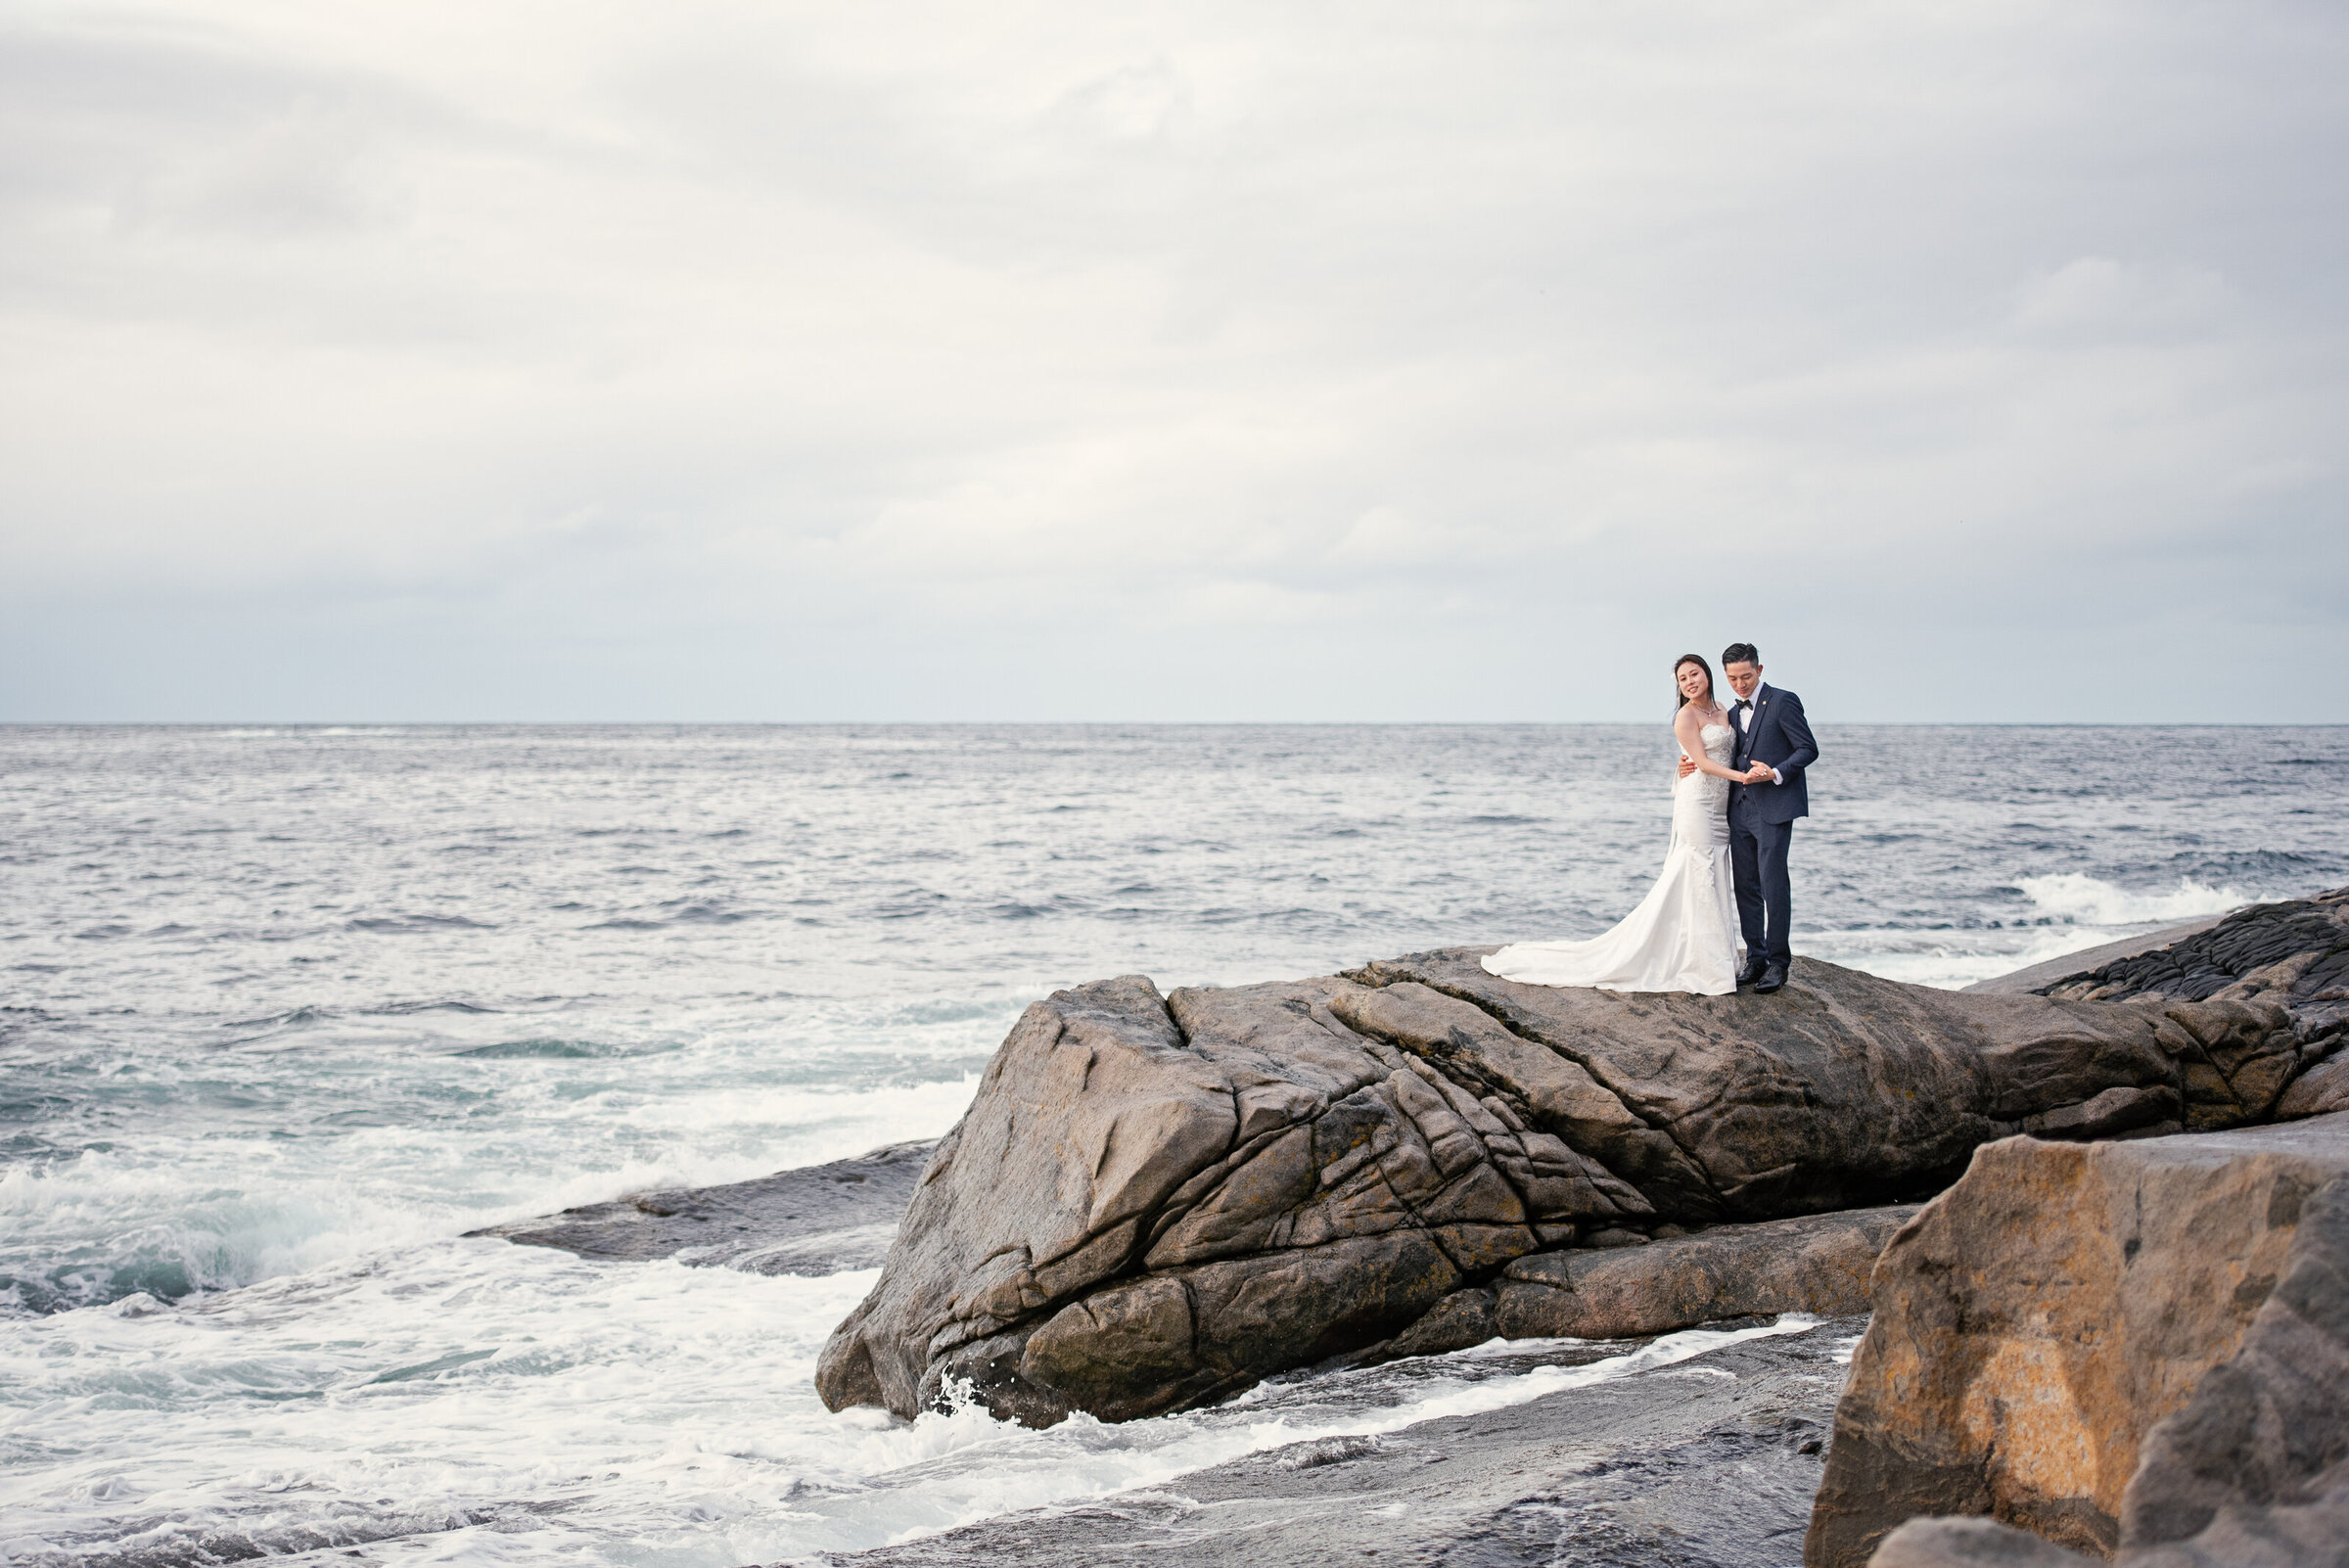 A couple stands closely embraced on a large rock by the sea in Senja, Norway, with waves gently breaking against the rocky shore around them. The vast ocean behind them meets a cloudy sky at the horizon, reflecting the serene and isolated setting of their elopement.